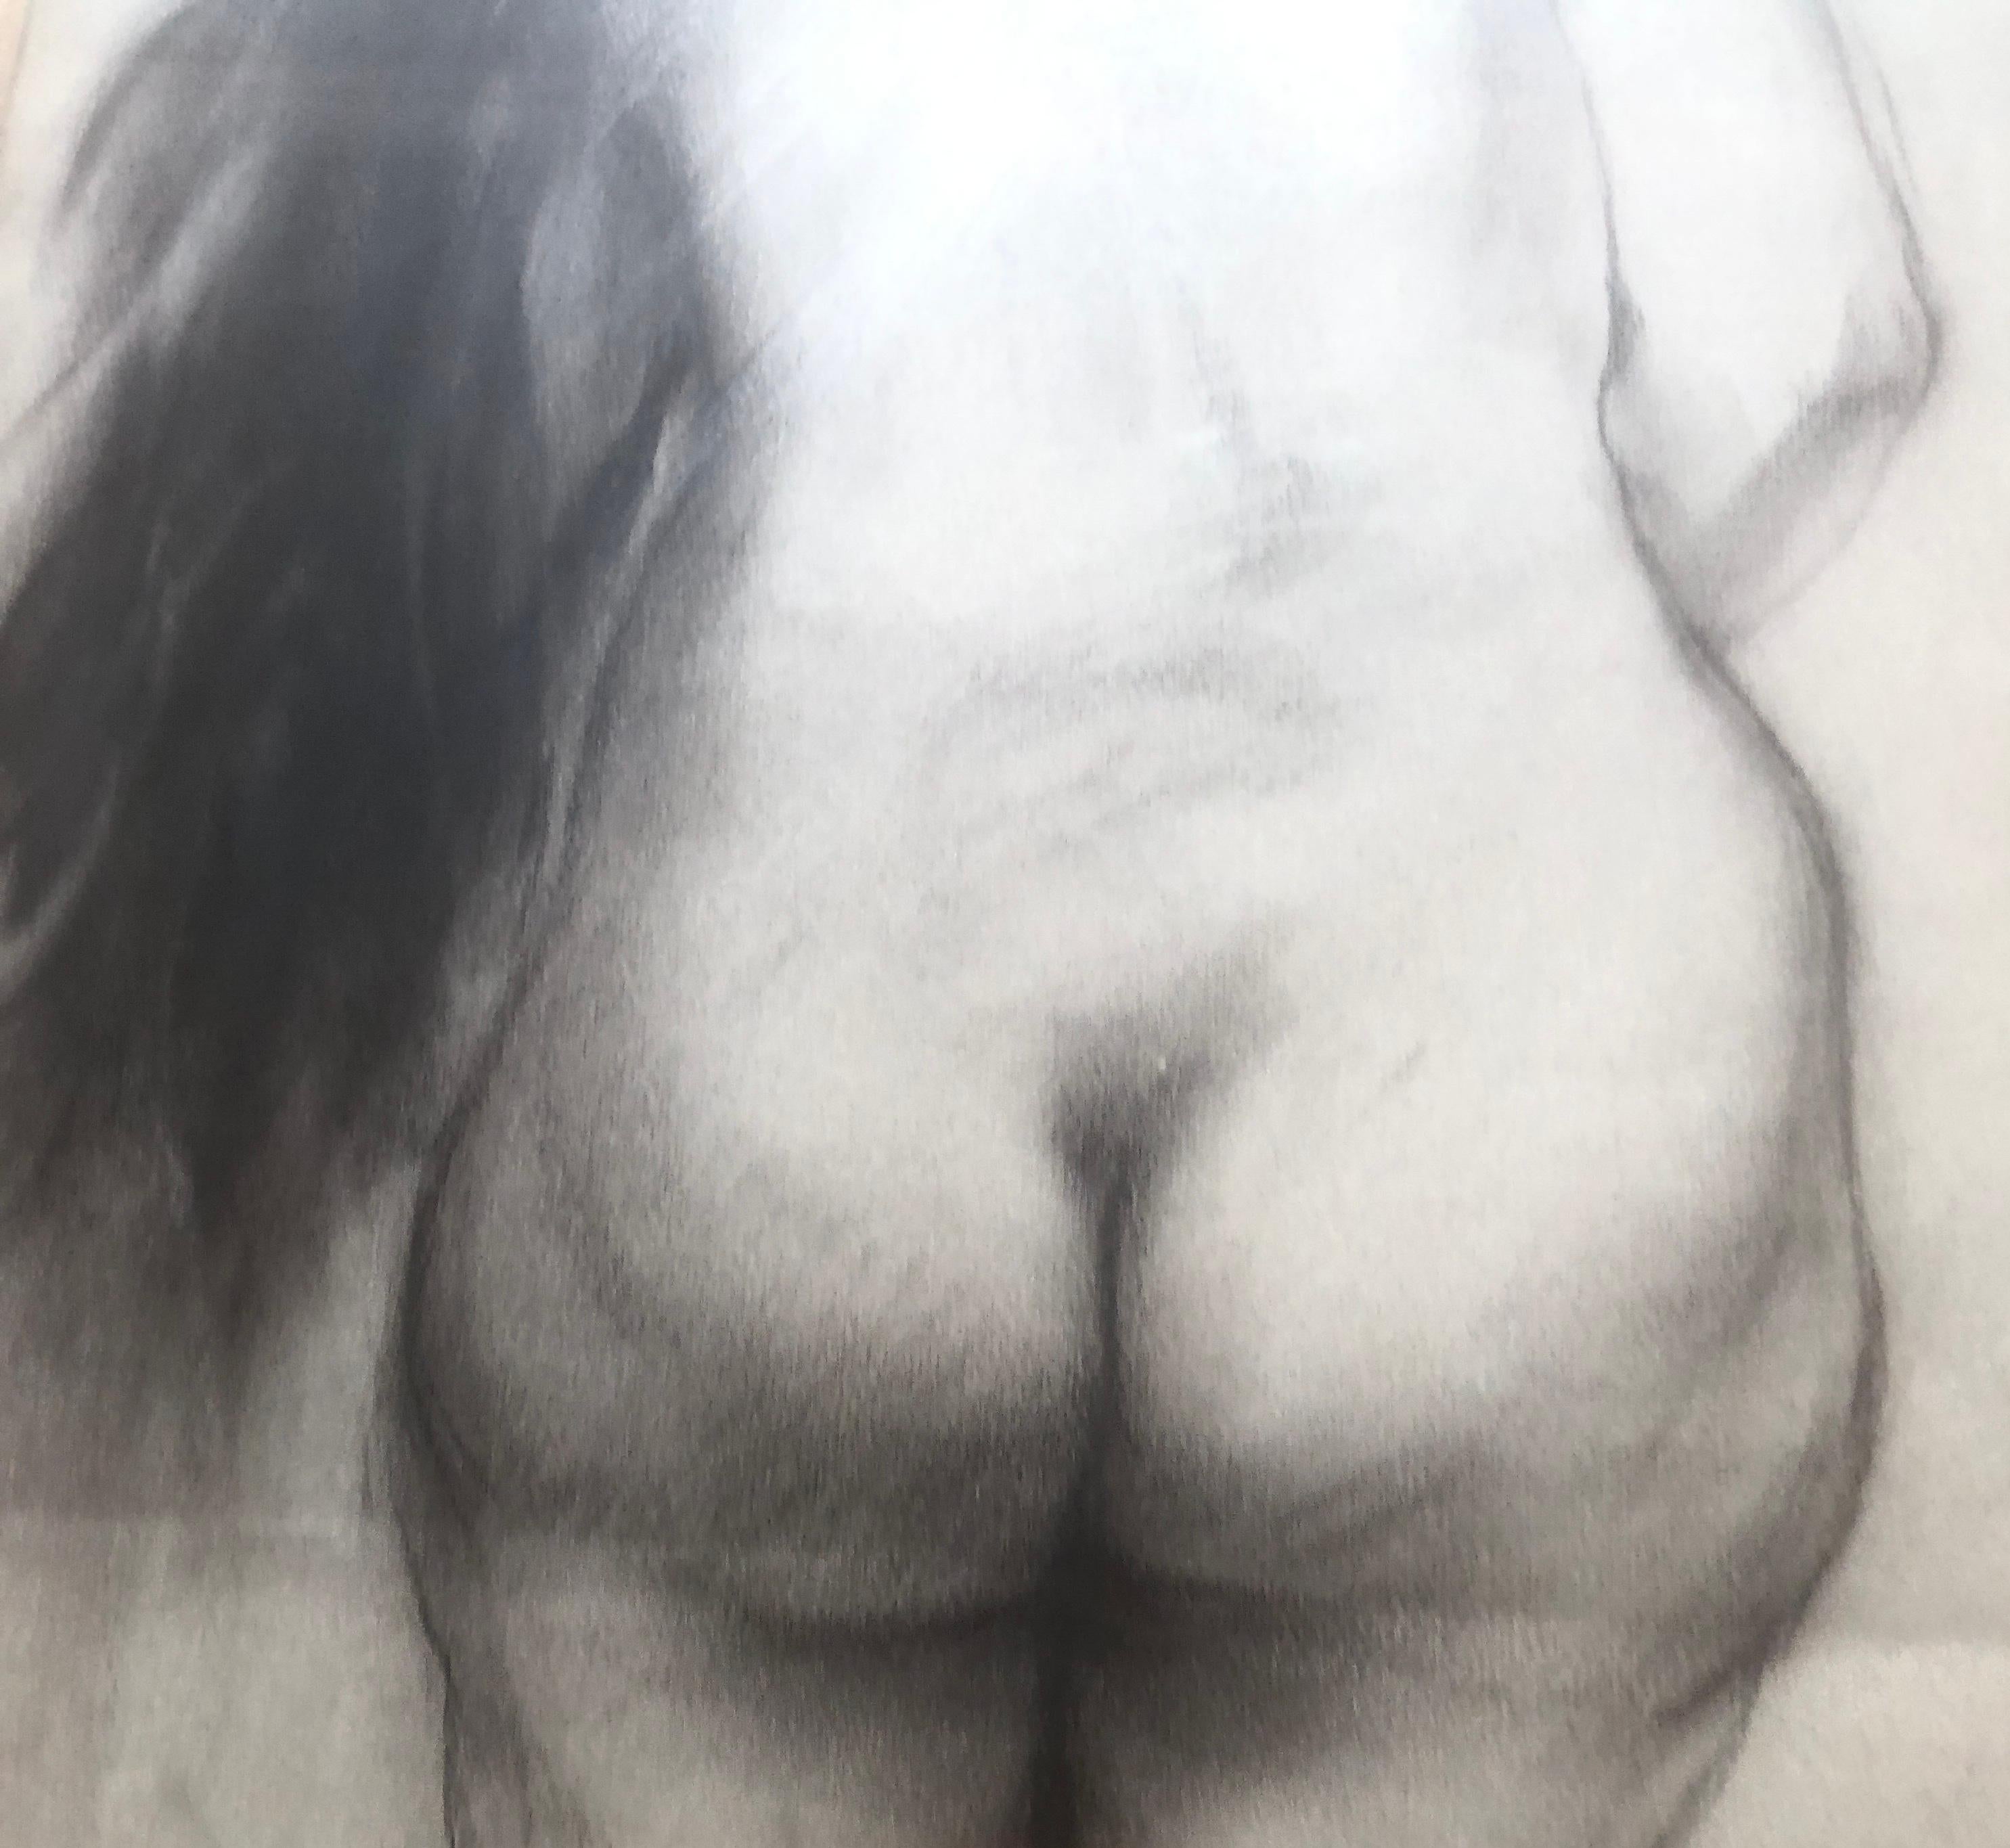 José Luis Fuentetaja (1951) - Nude woman - Charcoal drawing
Drawing measurements 48x32 cm.
Frame measurements 69x53 cm.

Is born in Madrid on the 21st july 1951.
After attending primary school, he starts to grow an enormous tendency for drawing. 
At